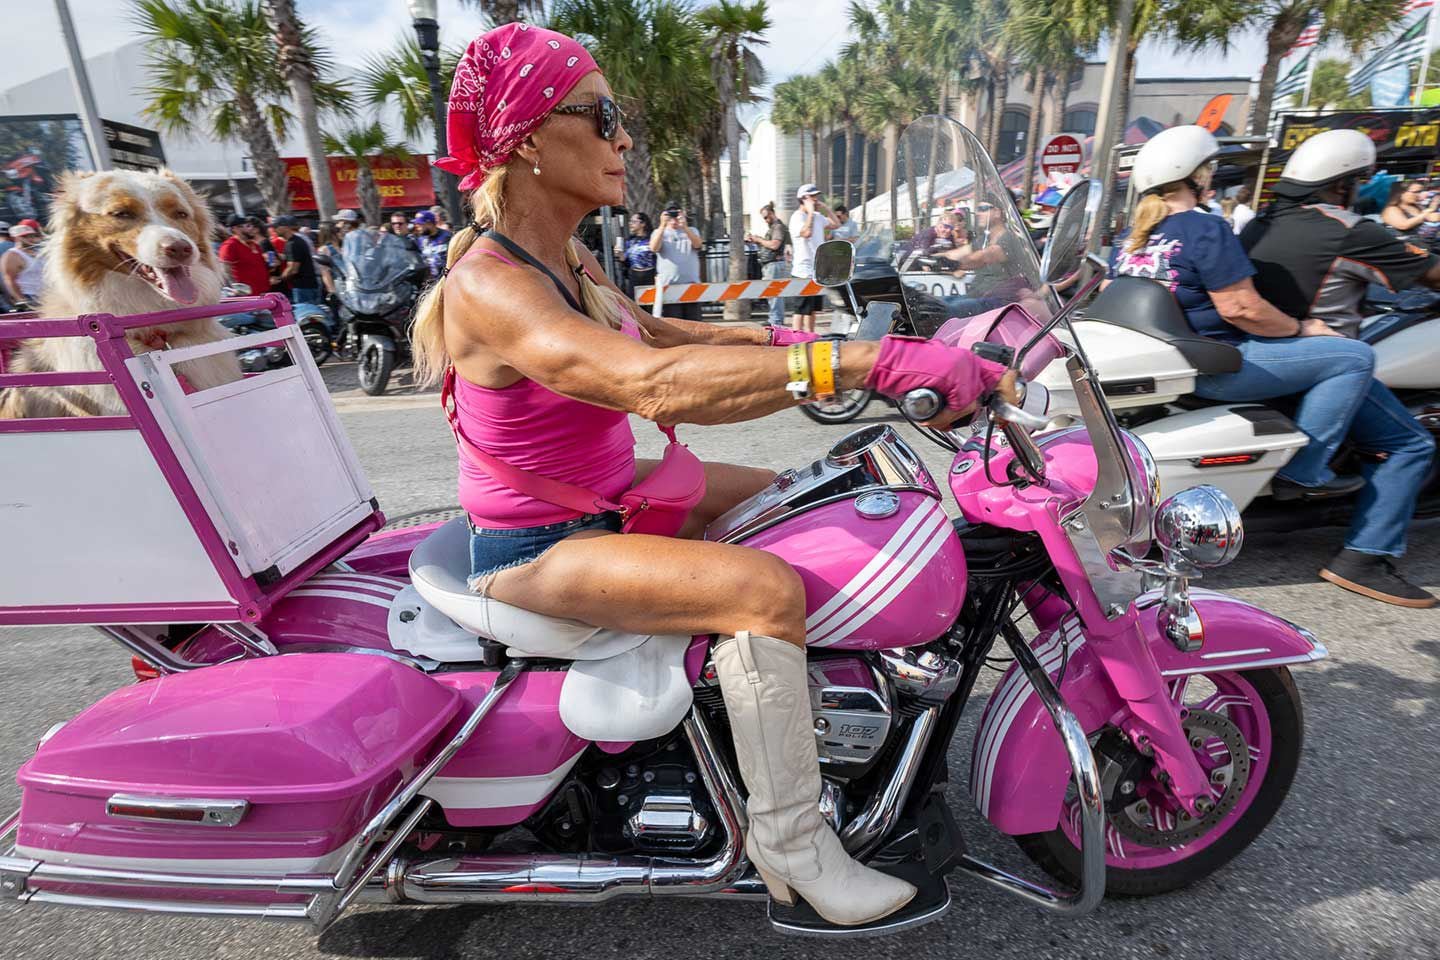 Some dogs have all the luck. Making a fashion statement while riding down Daytona Beach’s Main Street.